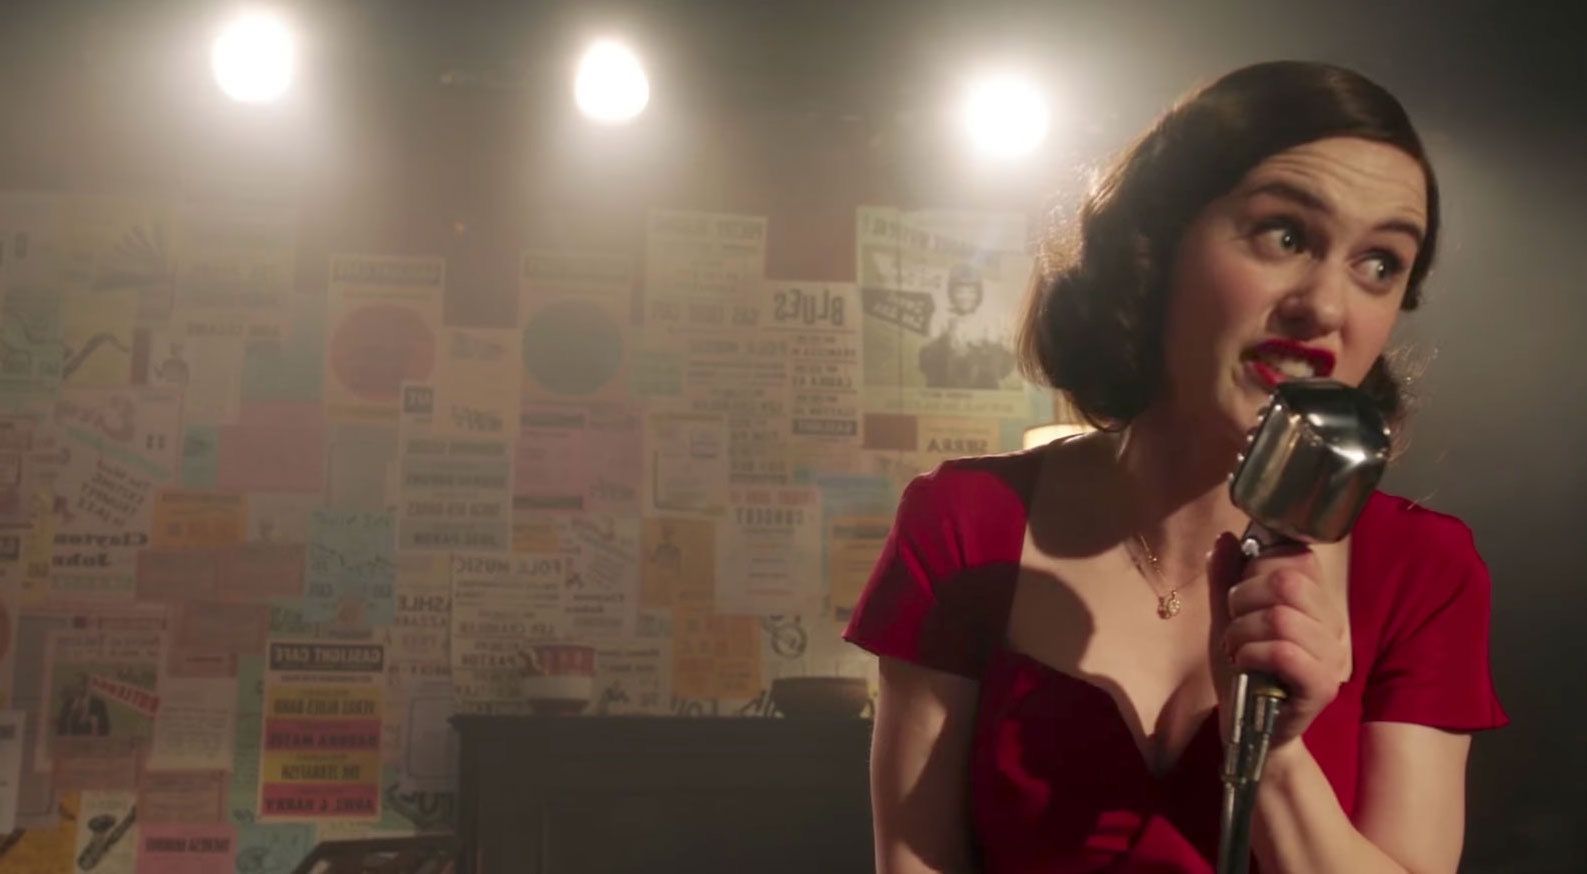 Review: “Mrs. Maisel” loses momentum but retains charm